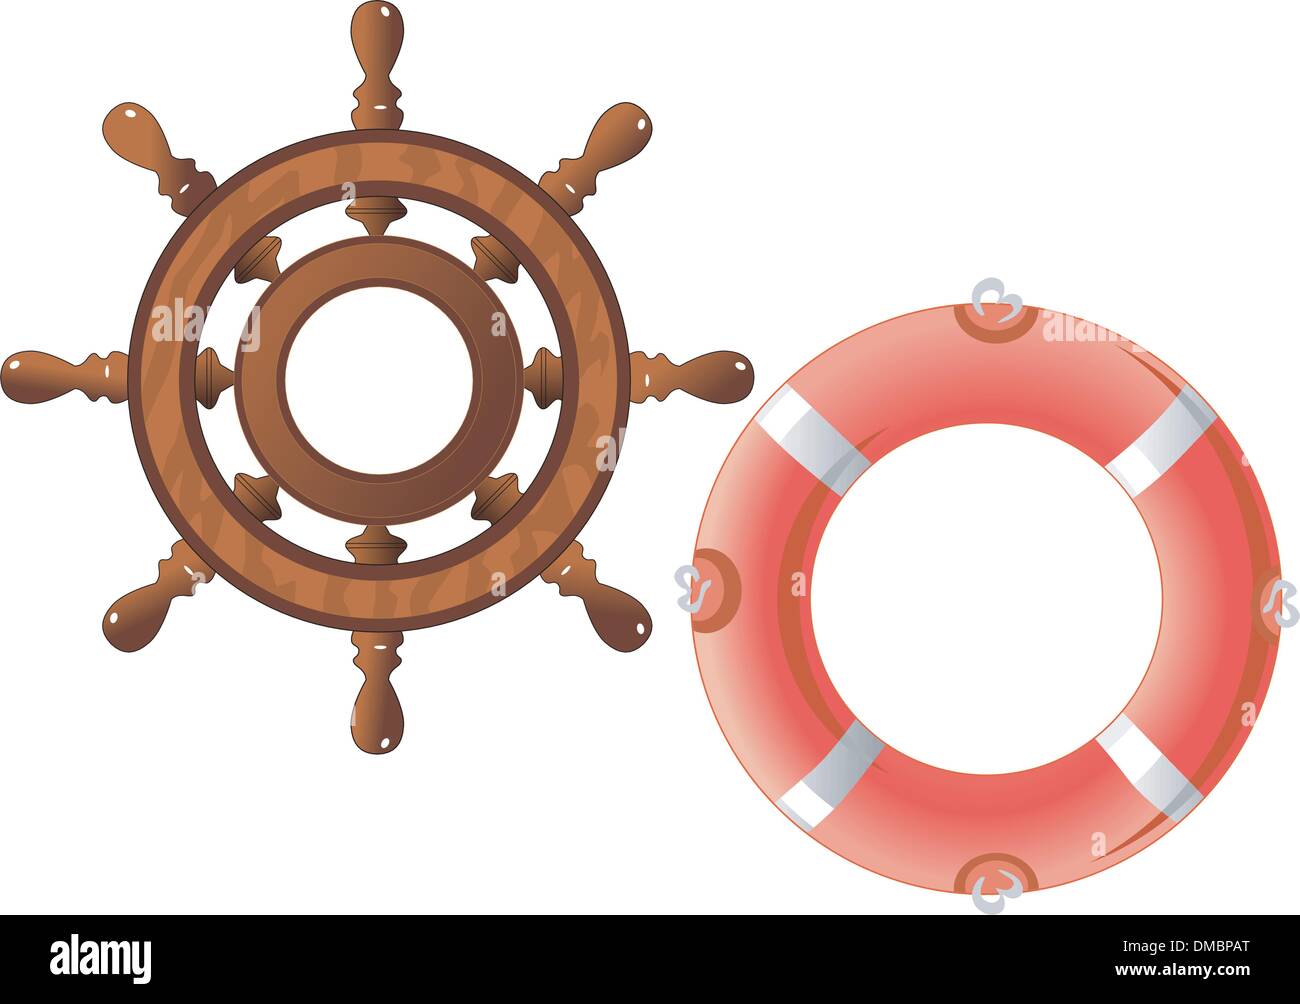 set of a steering wheel and a lifebuoy Stock Vector